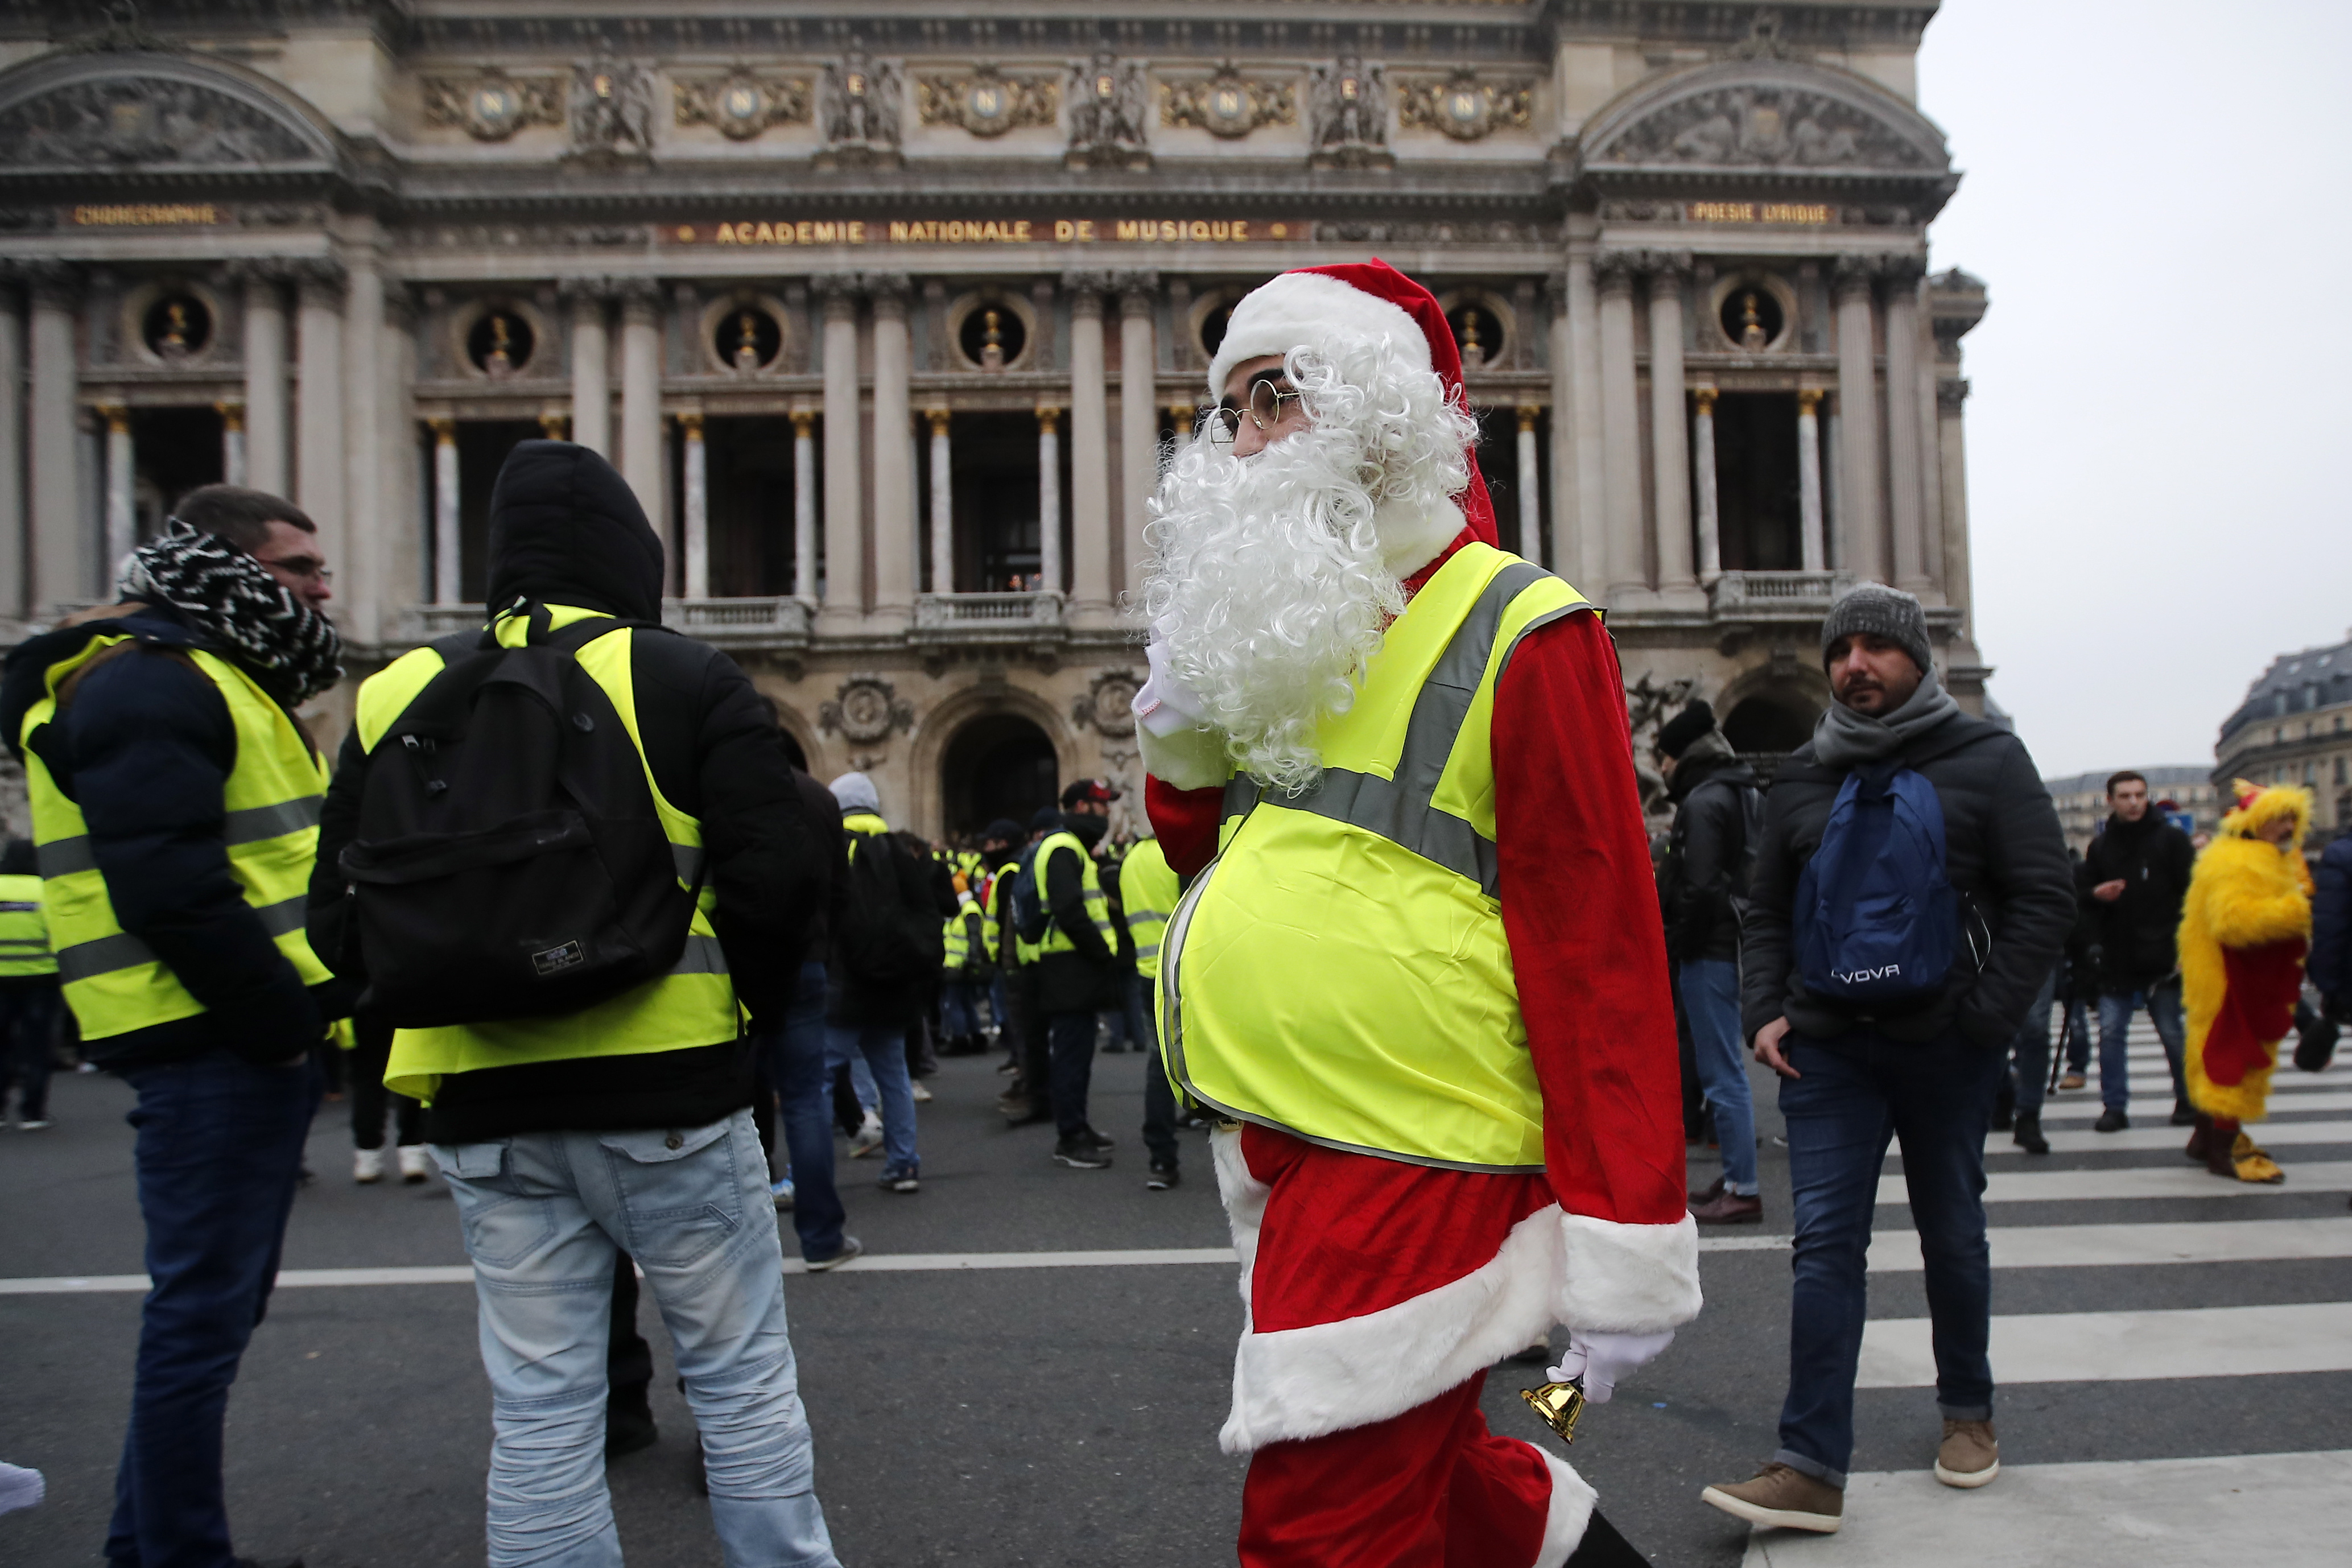 epa07232362 A Yellow Vest protestor wearing a Santa Claus outfit attends a demonstration in front of the Opera in Paris, France, 15 December 2018. The so-called 'gilets jaunes' (yellow vests) is a protest movement, which reportedly has no political affiliation, that continues protests across the nation over high fuel prices.  EPA/IAN LANGSDON